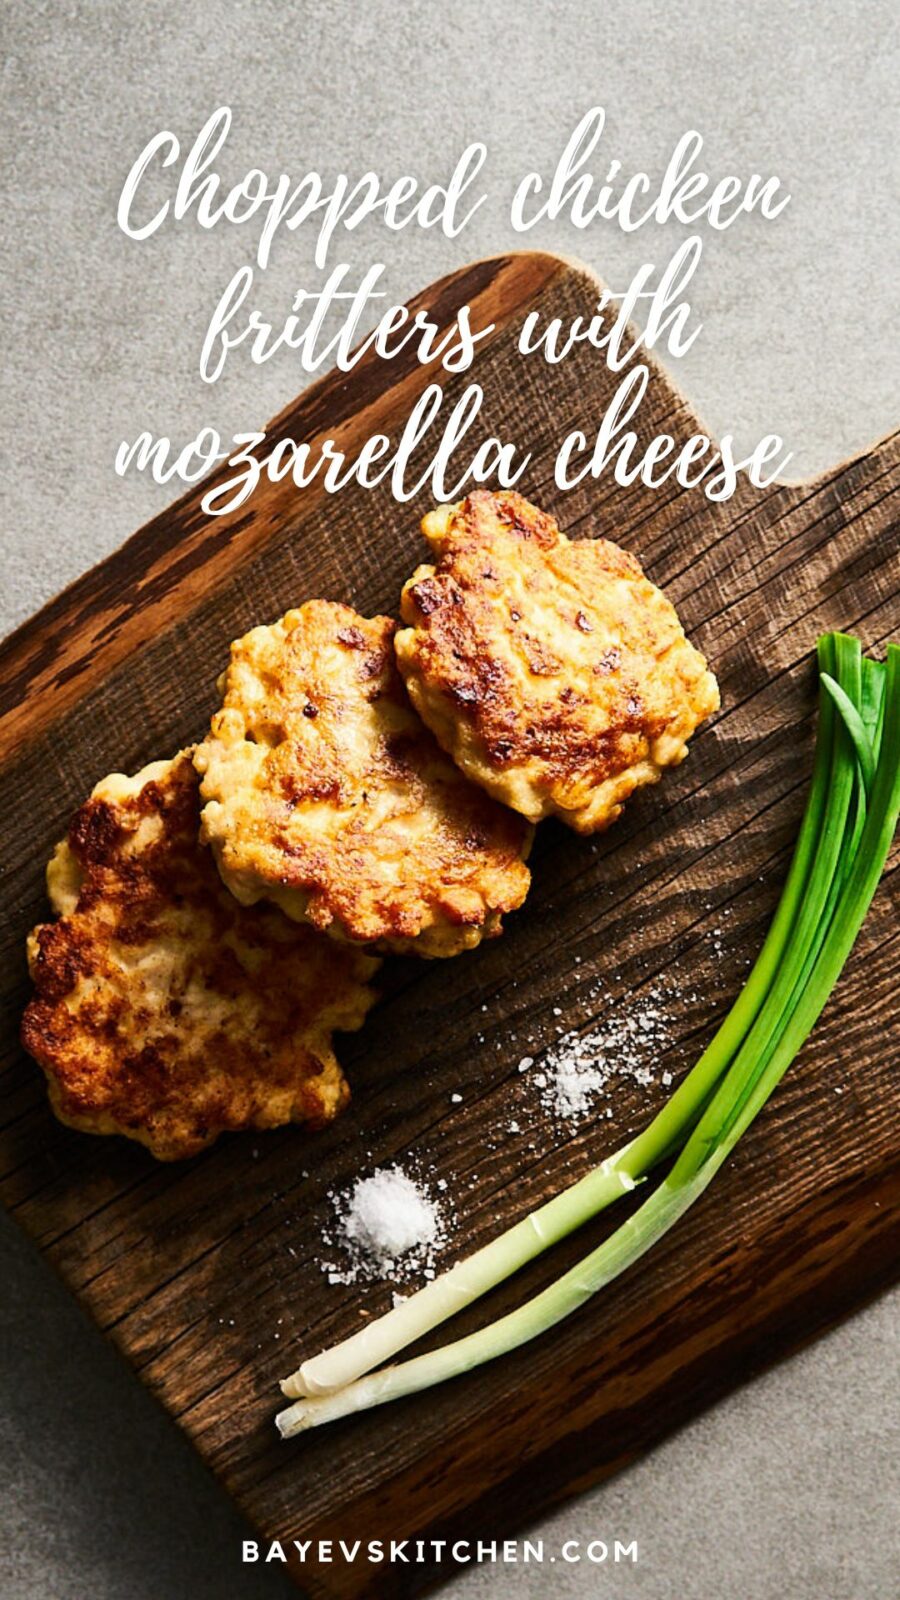 Chopped chicken fritters with mozarella cheese by bayevskitchen.com
